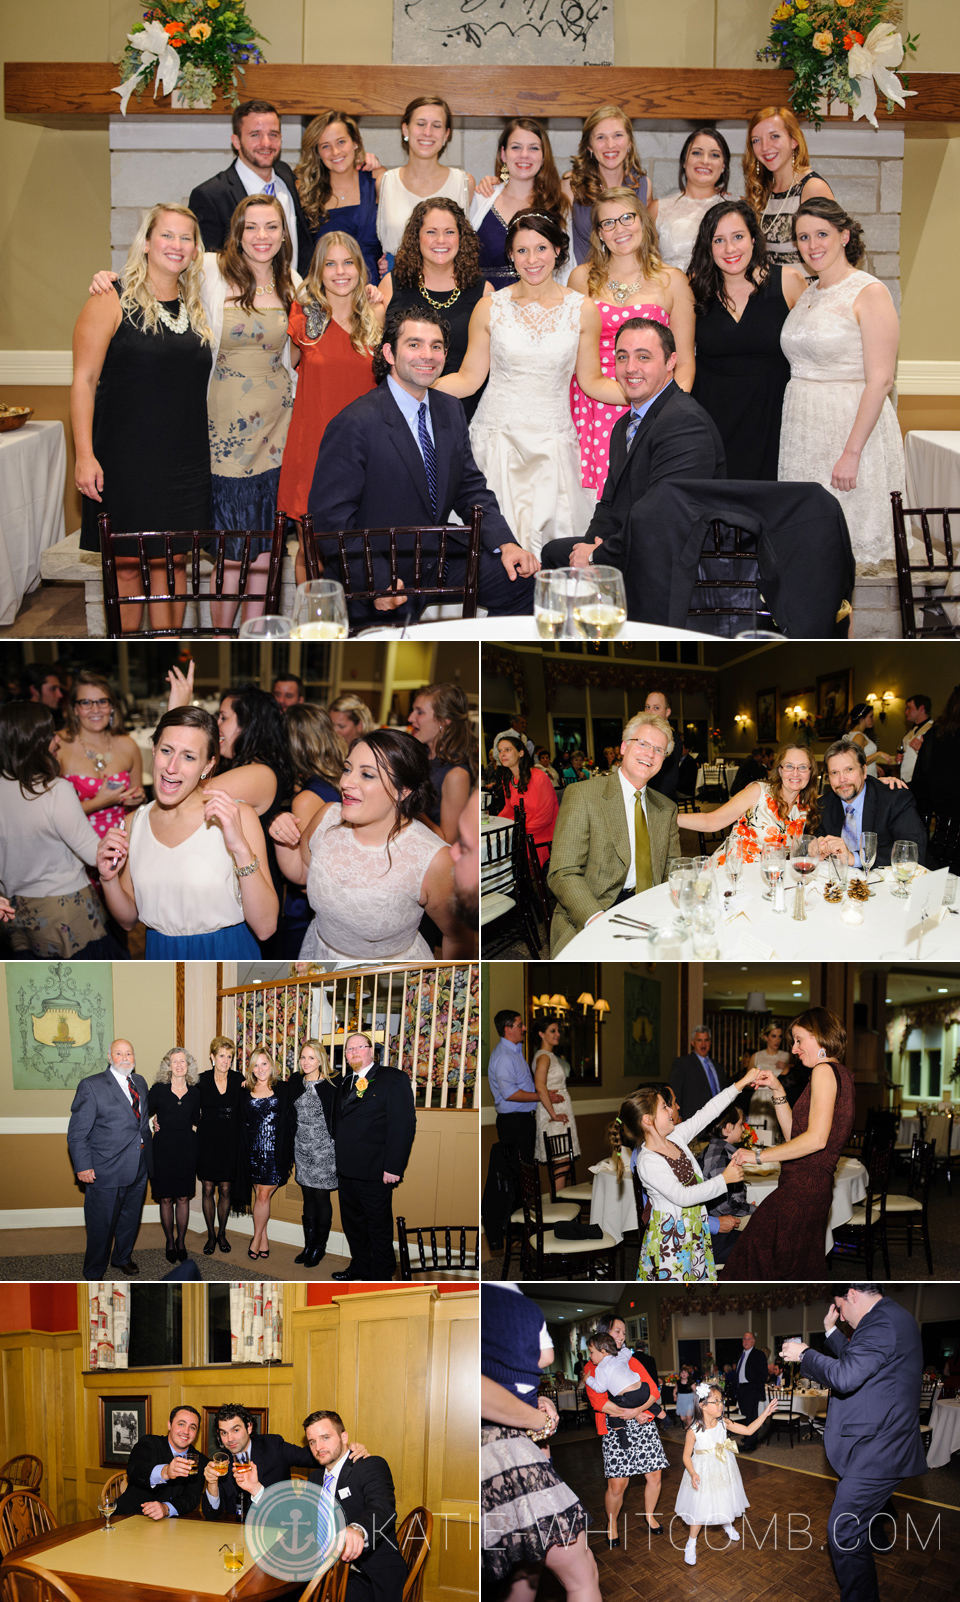 Wedding Reception at South Bend Country Club for a beautiful and elegant wedding